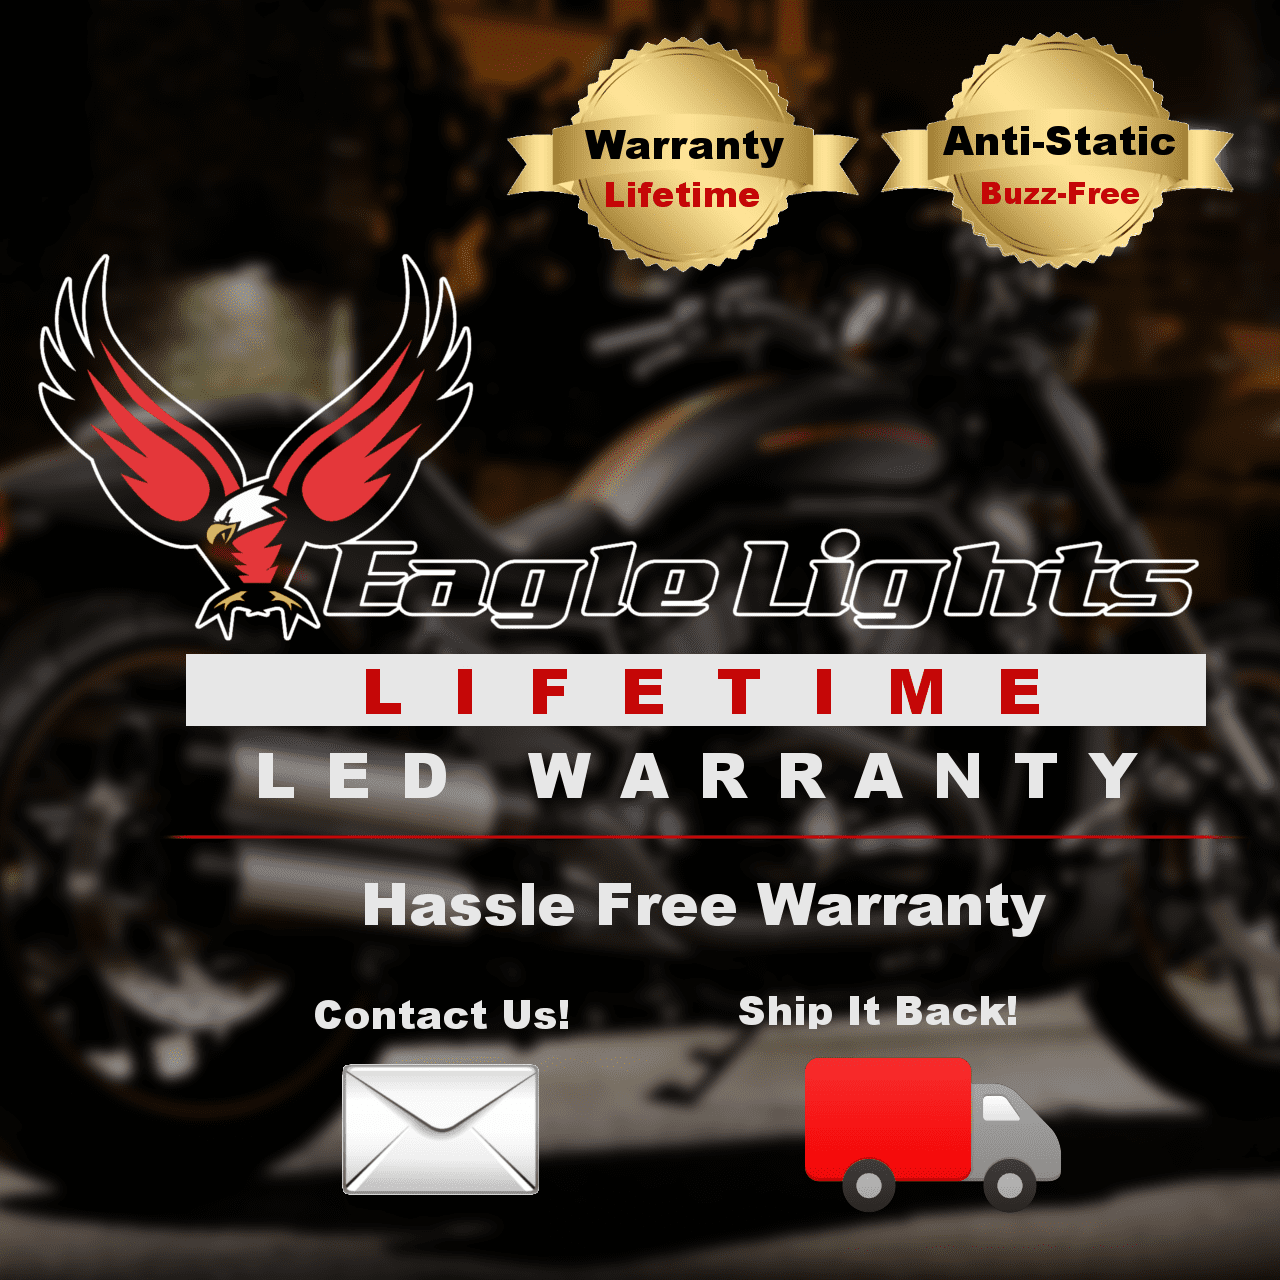 3 ¼” LED Rear Turn Signals - Eagle Lights 8748TS-1156R 3 1/4" Red Rear LED Turn Signals For Harleys - Double Pack - 1156 Base